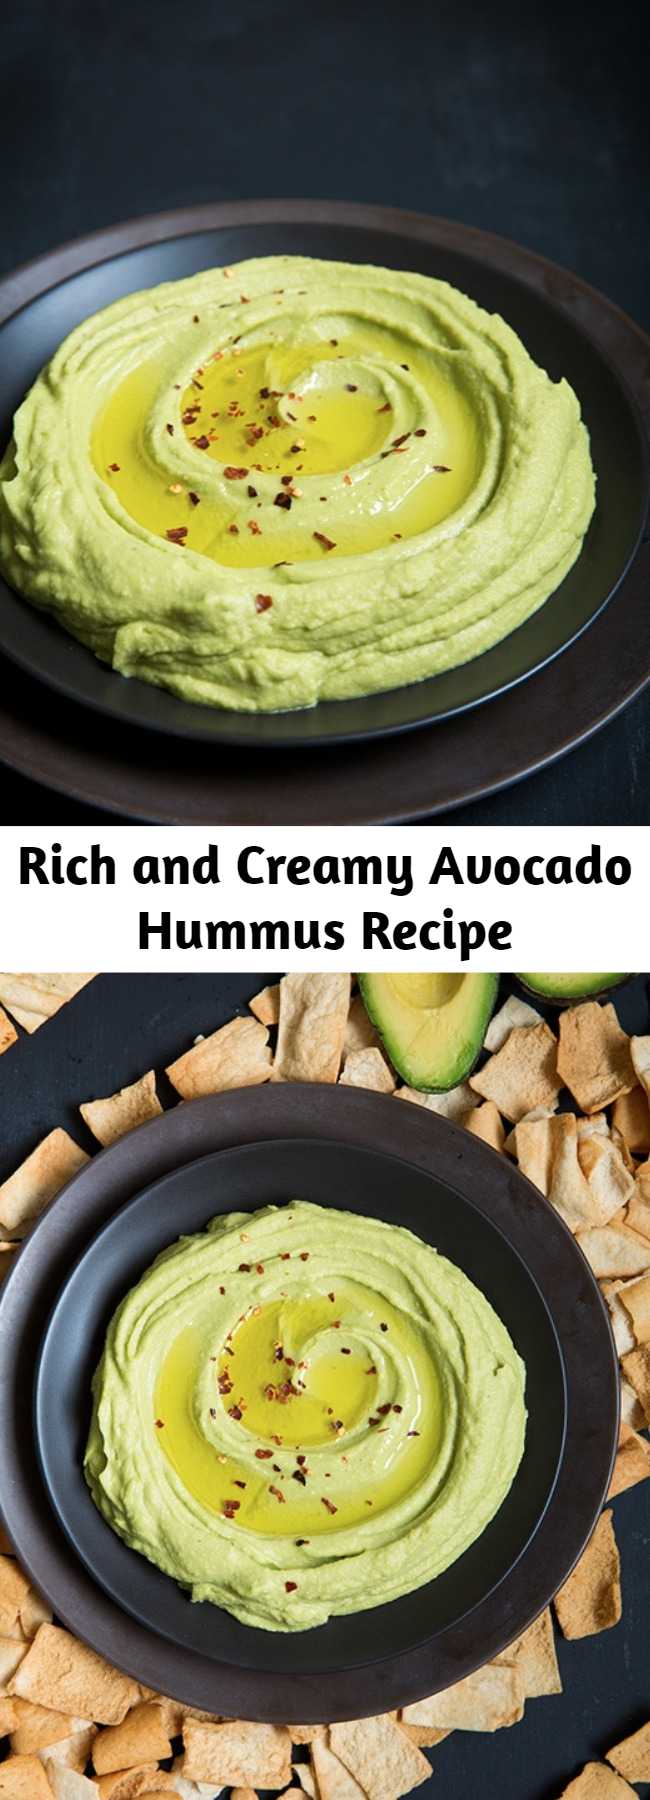 Rich and Creamy Avocado Hummus Recipe - This is the best hummus! It's rich and creamy and packed with that irresistible avocado flavor. Think hummus meets guacamole, I mean what more could you want? Perfect dip for veggies or pita chips or as a spread for your favorite sandwiches.